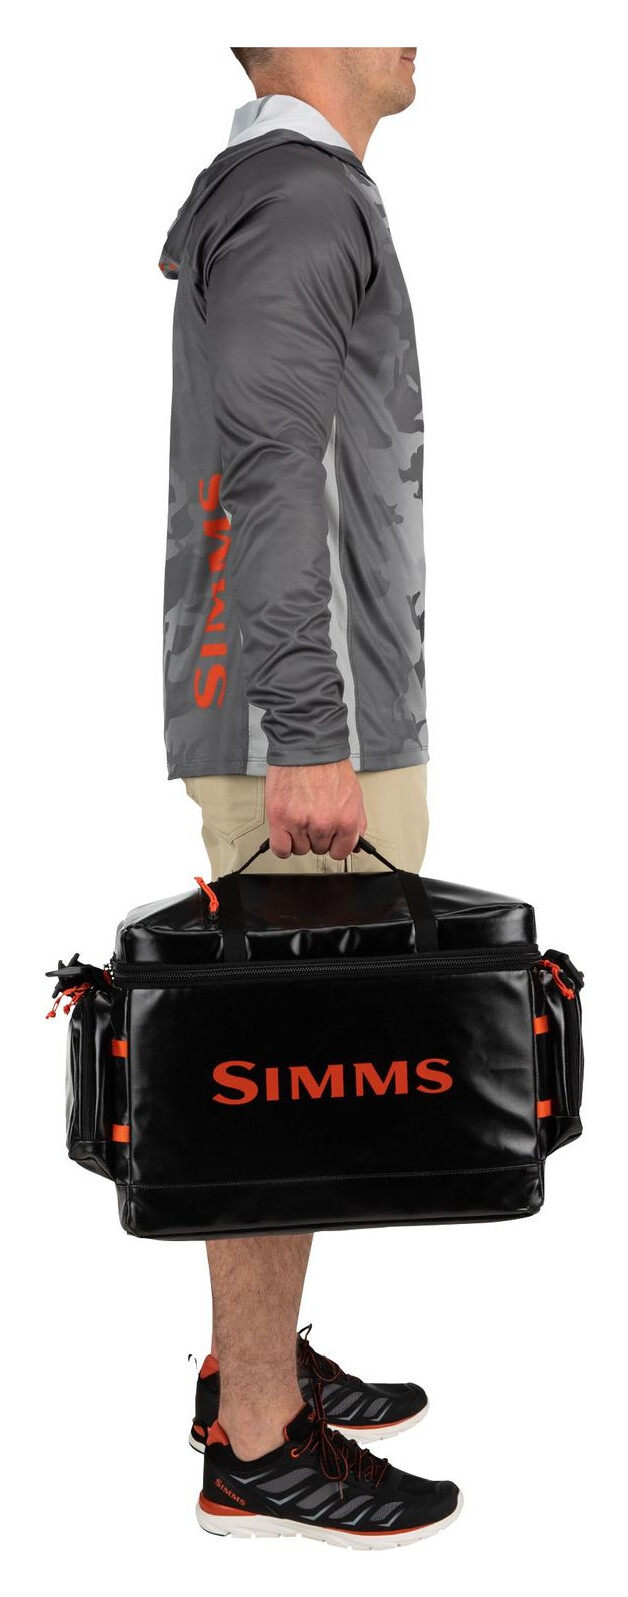 Simms Challenger Mesh Duffel - 60L | Simms Fishing Products